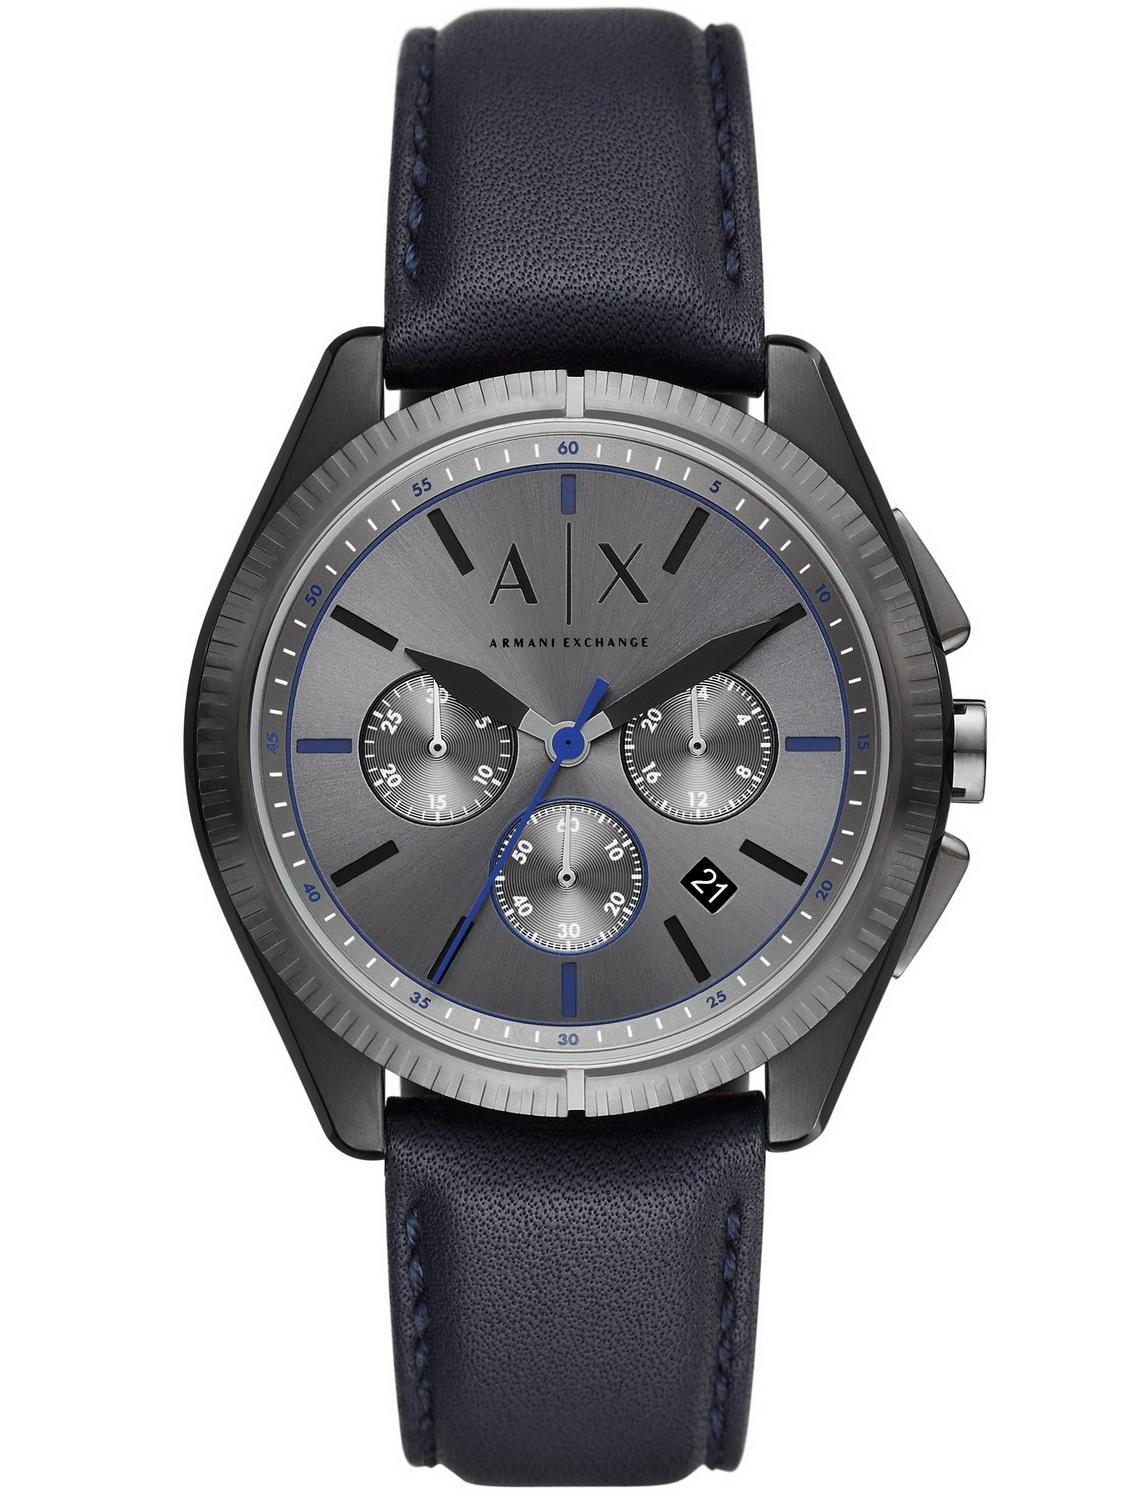 ARMANI EXCHANGE Chronograph Mens - AX2855, Black case with Blue Leather Strap